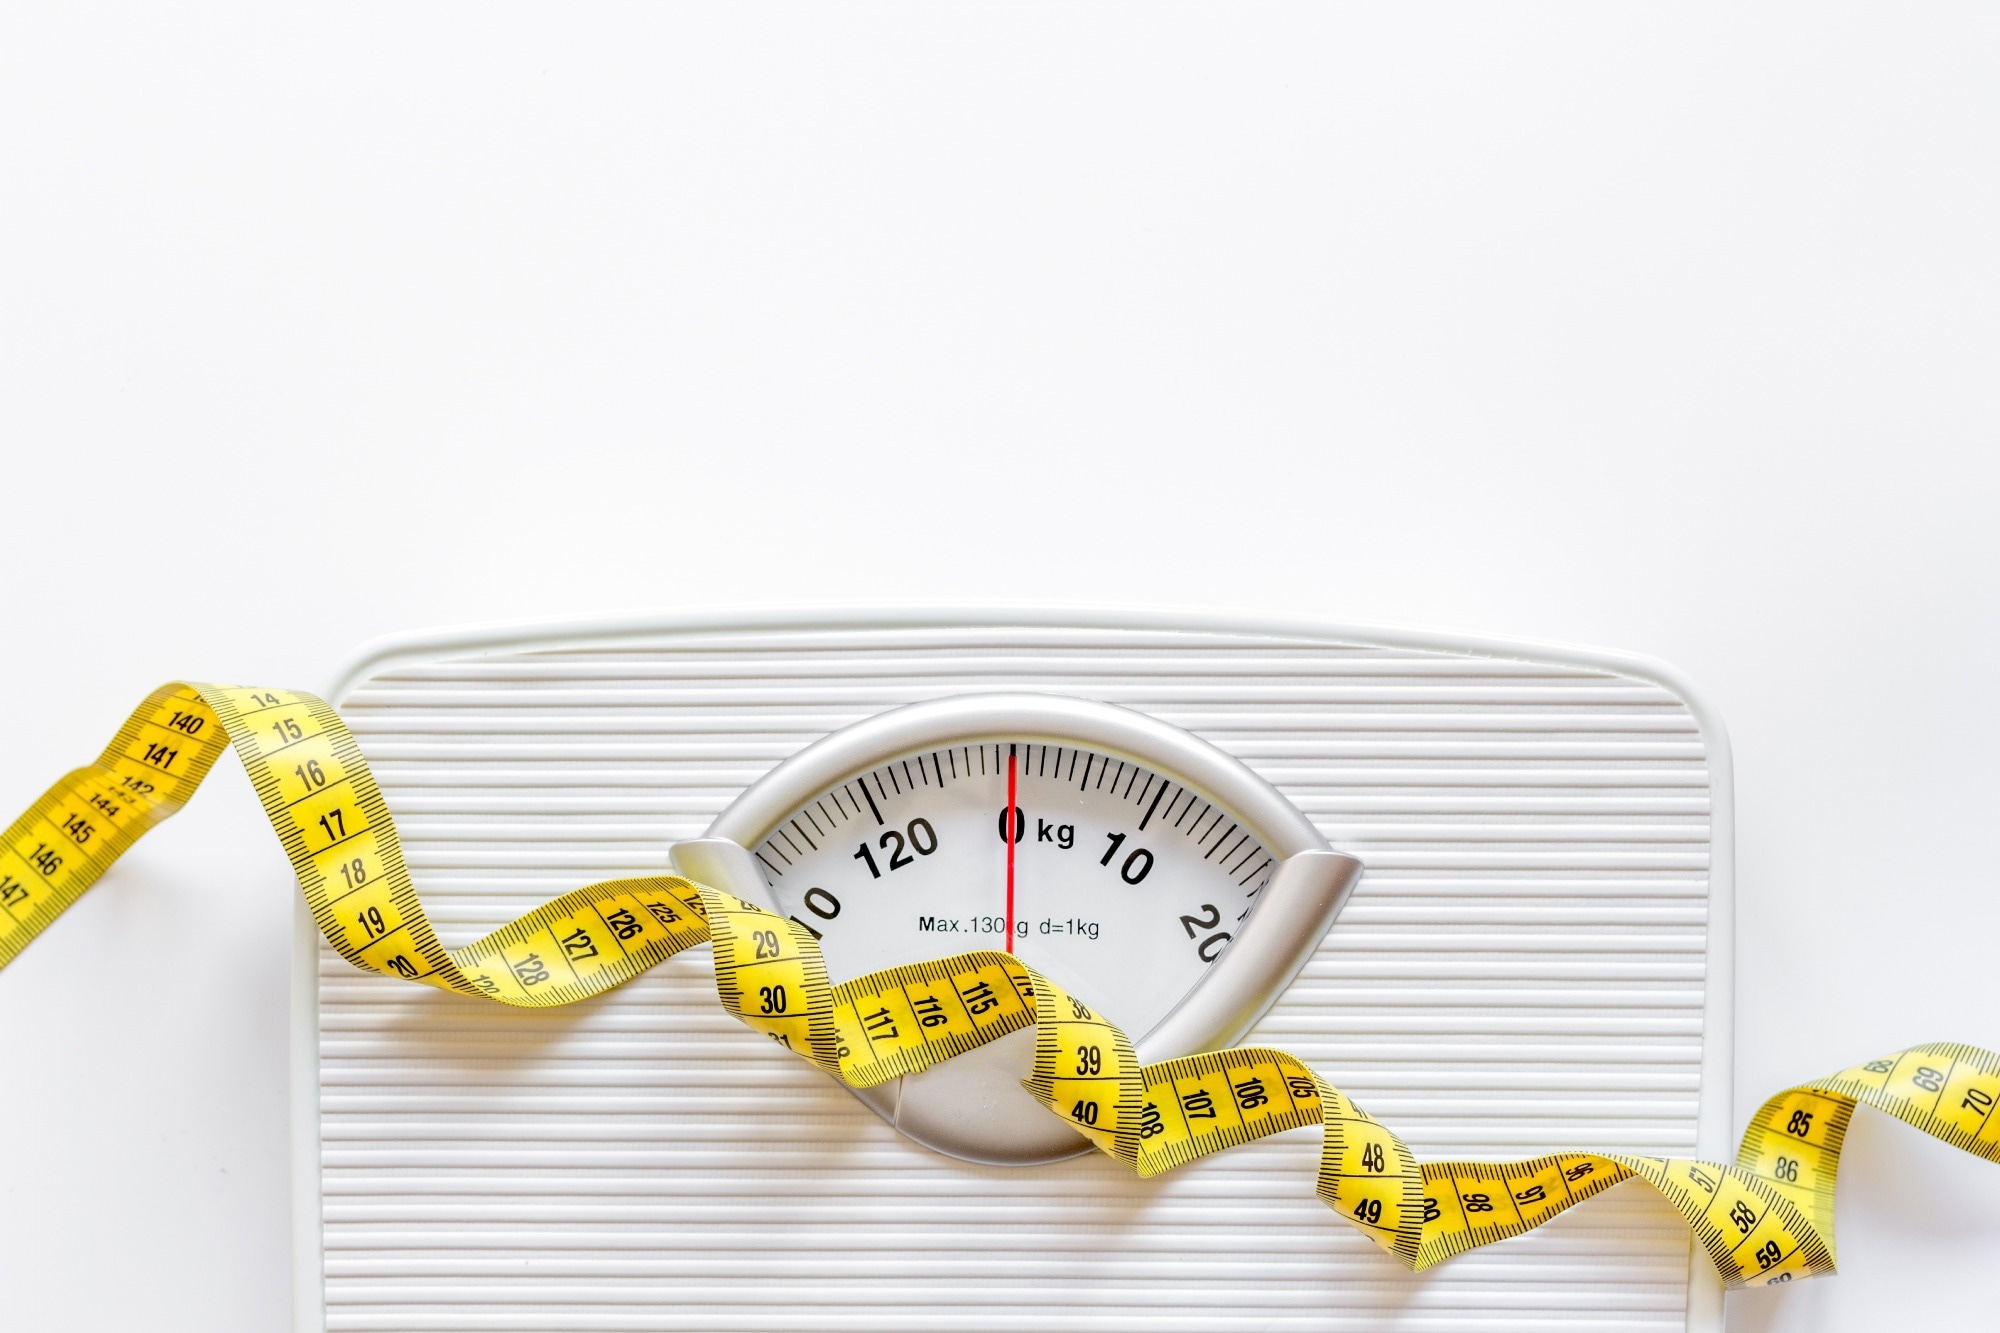 Study: Cancer Diagnoses After Recent Weight Loss. Image Credit: 279photo Studio / Shutterstock